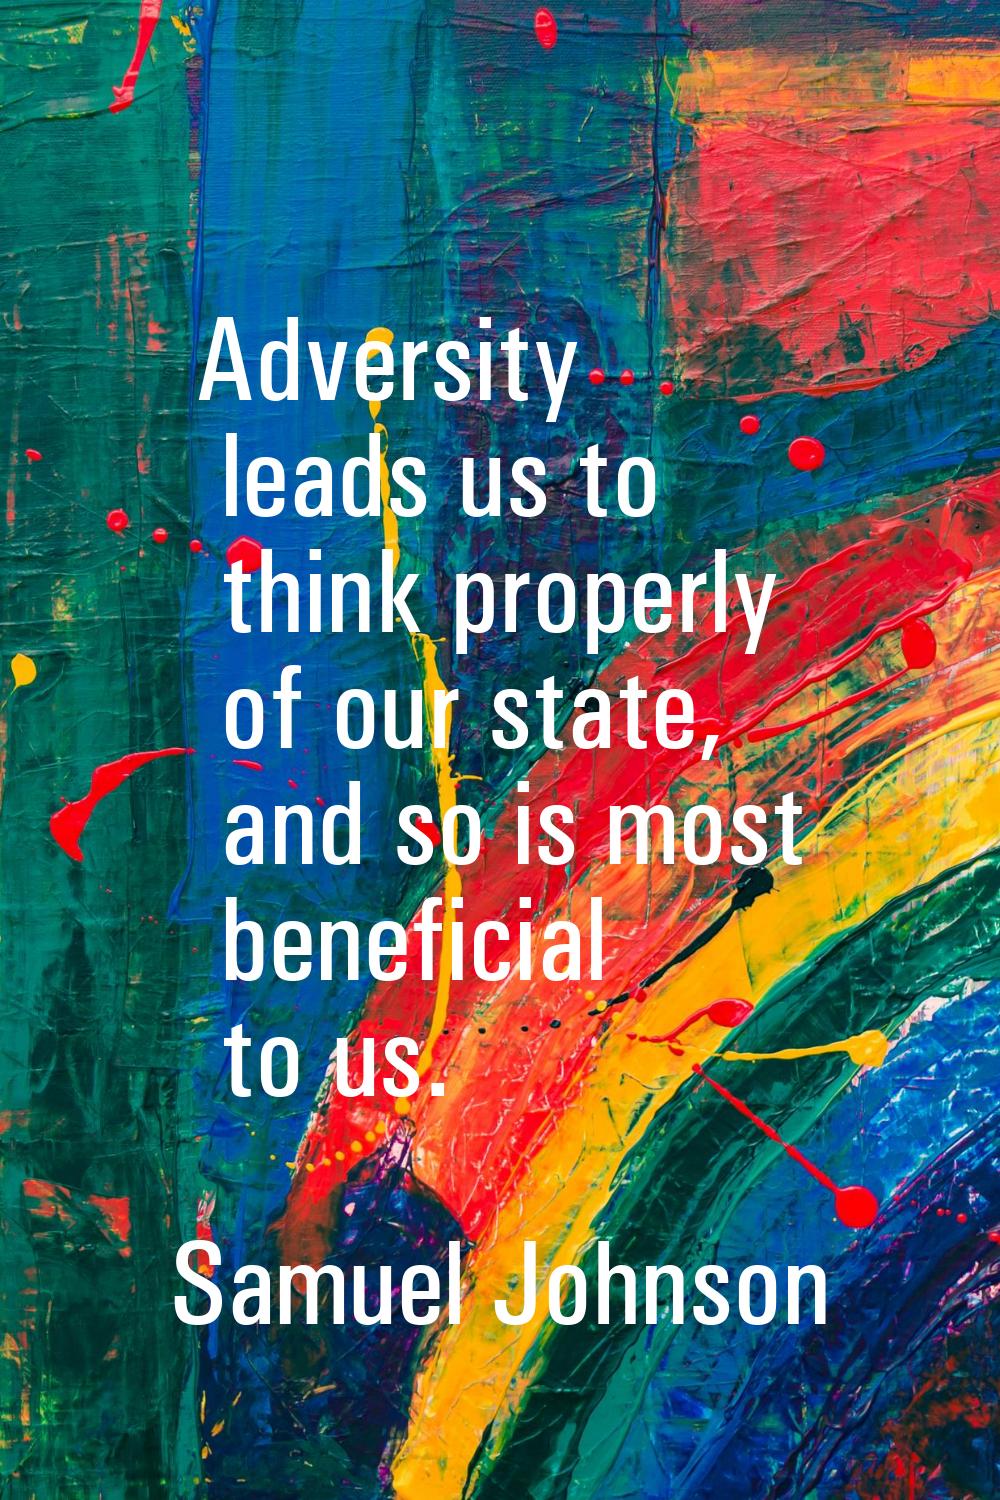 Adversity leads us to think properly of our state, and so is most beneficial to us.